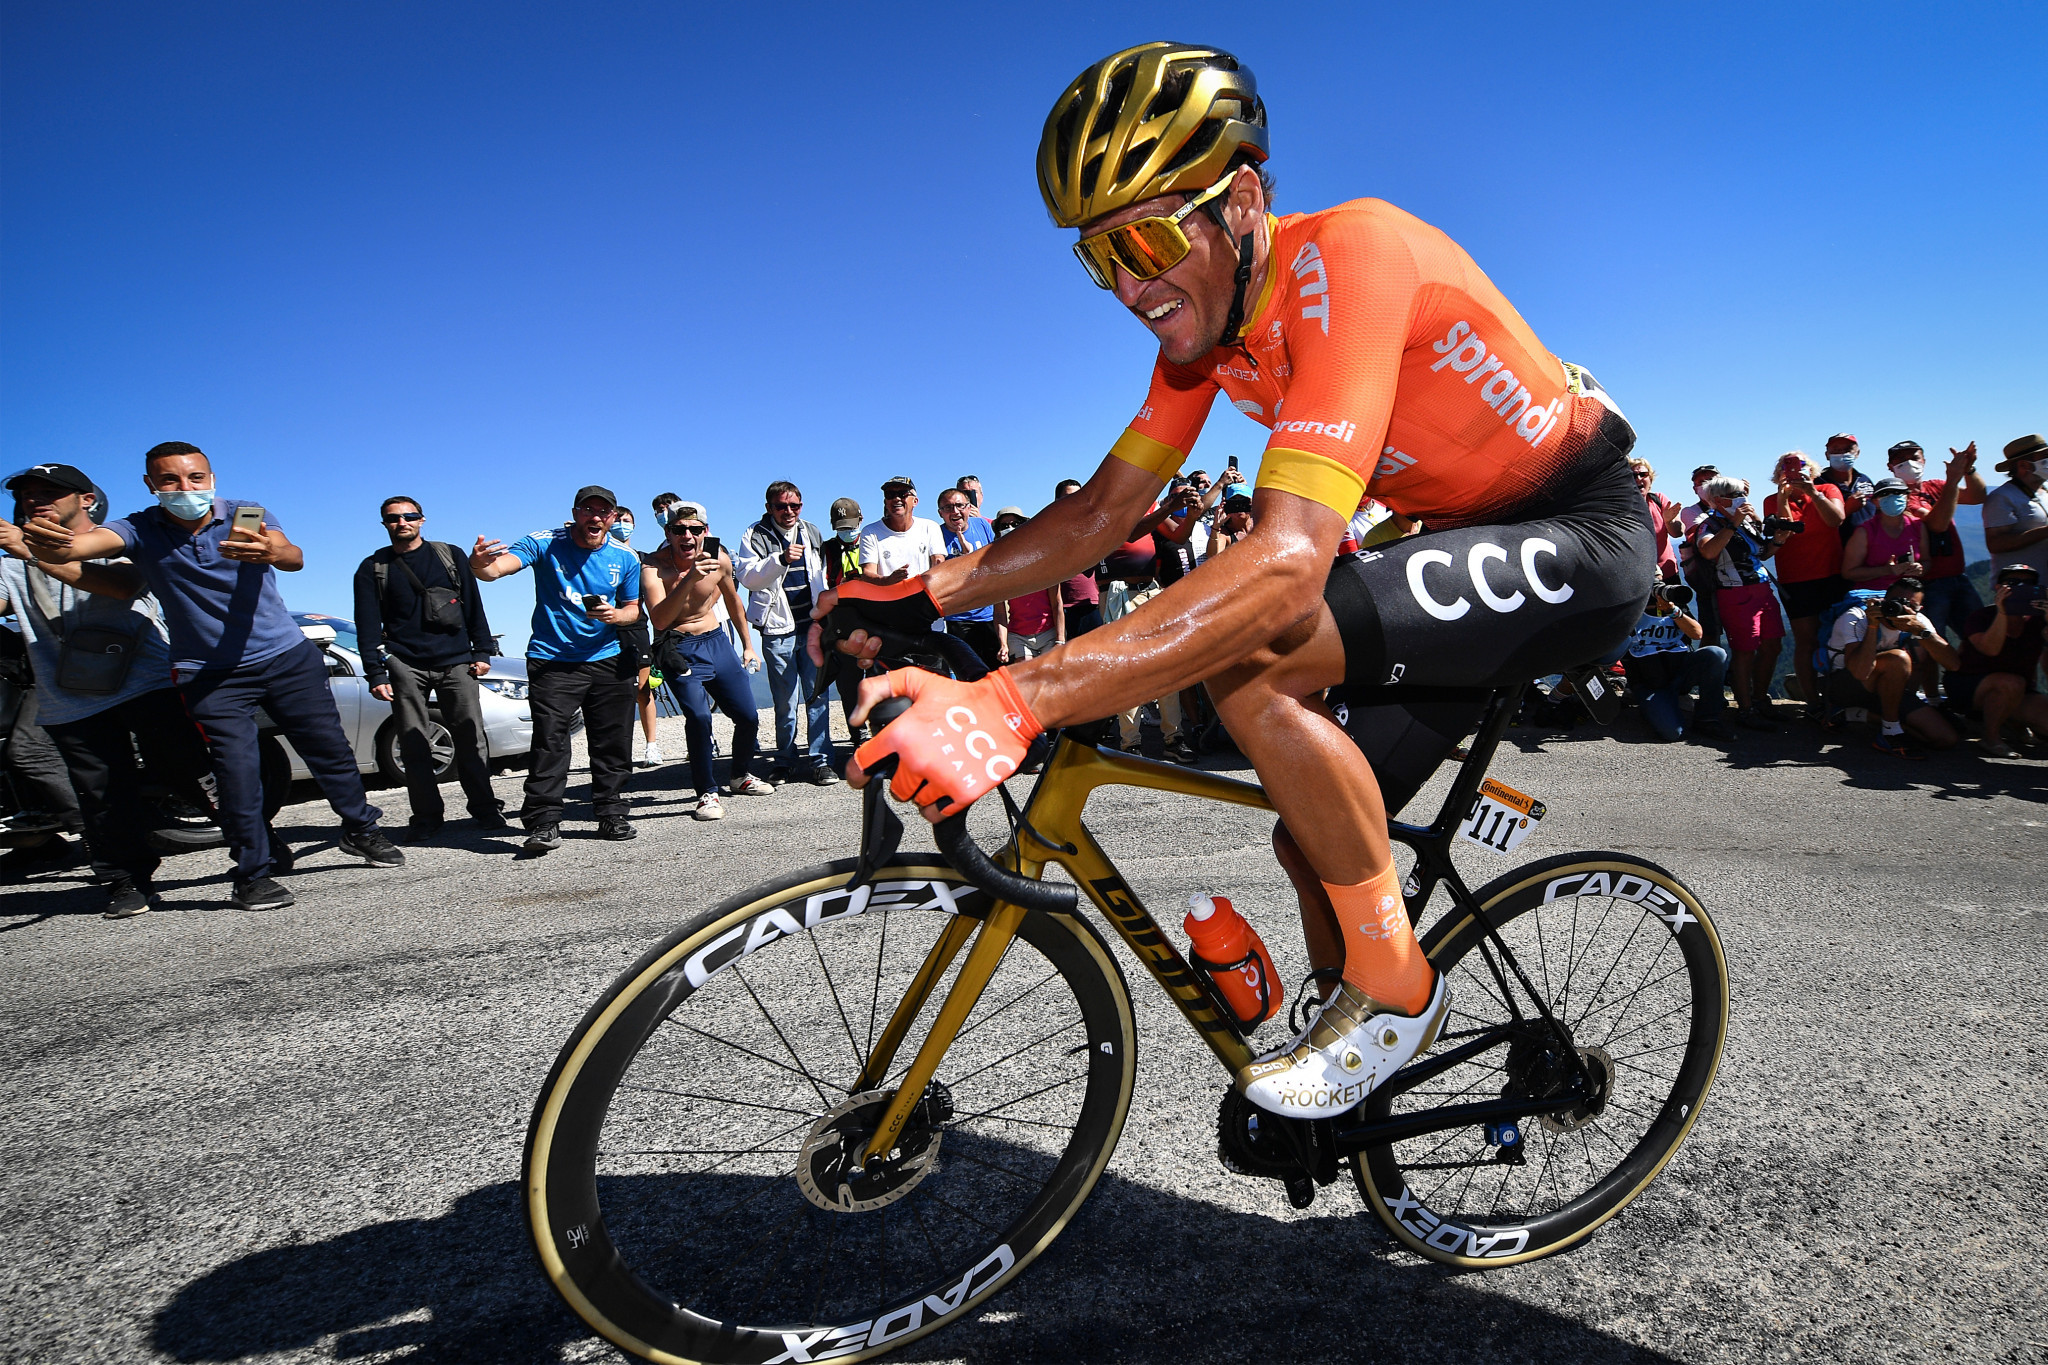 Belgium’s Greg Van Avermaet finished over two minutes behind the stage winner in third ©Getty Images